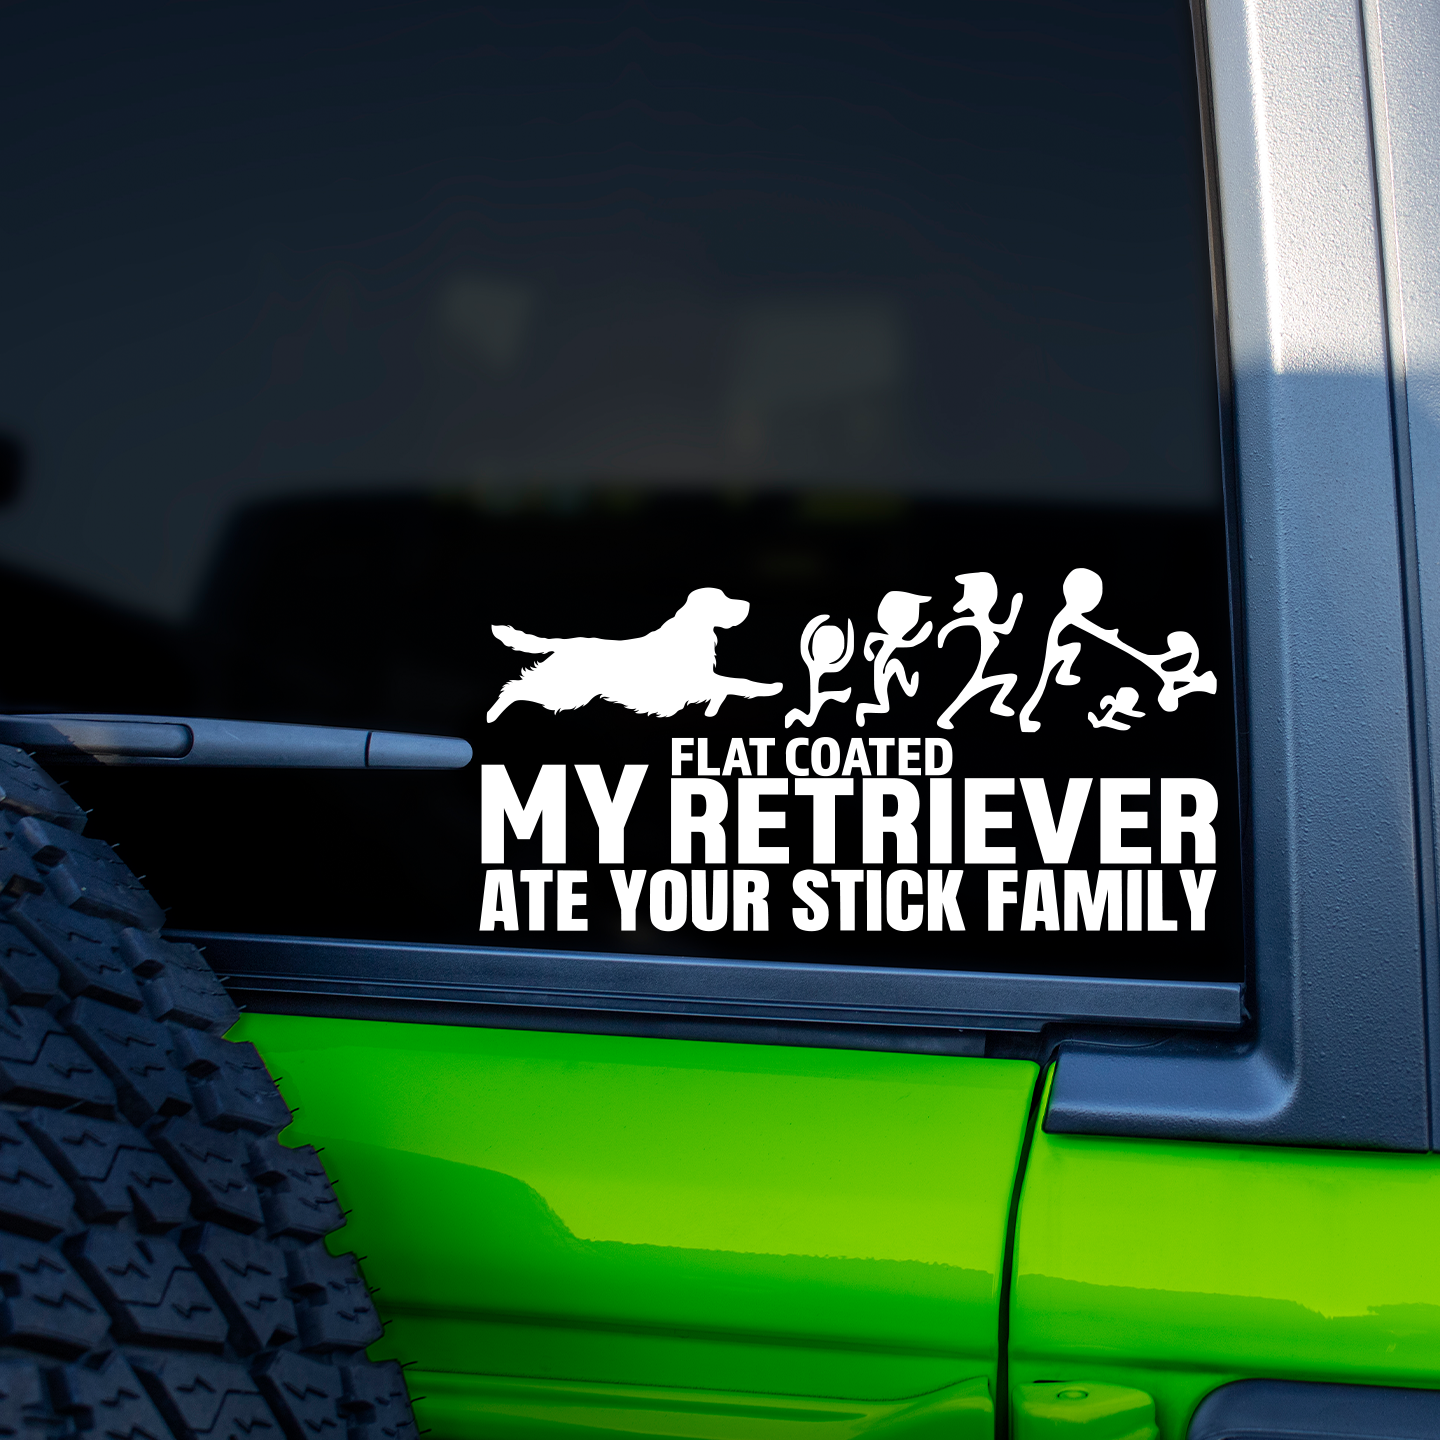 My Flat Coated Retriever Ate Your Stick Family Sticker